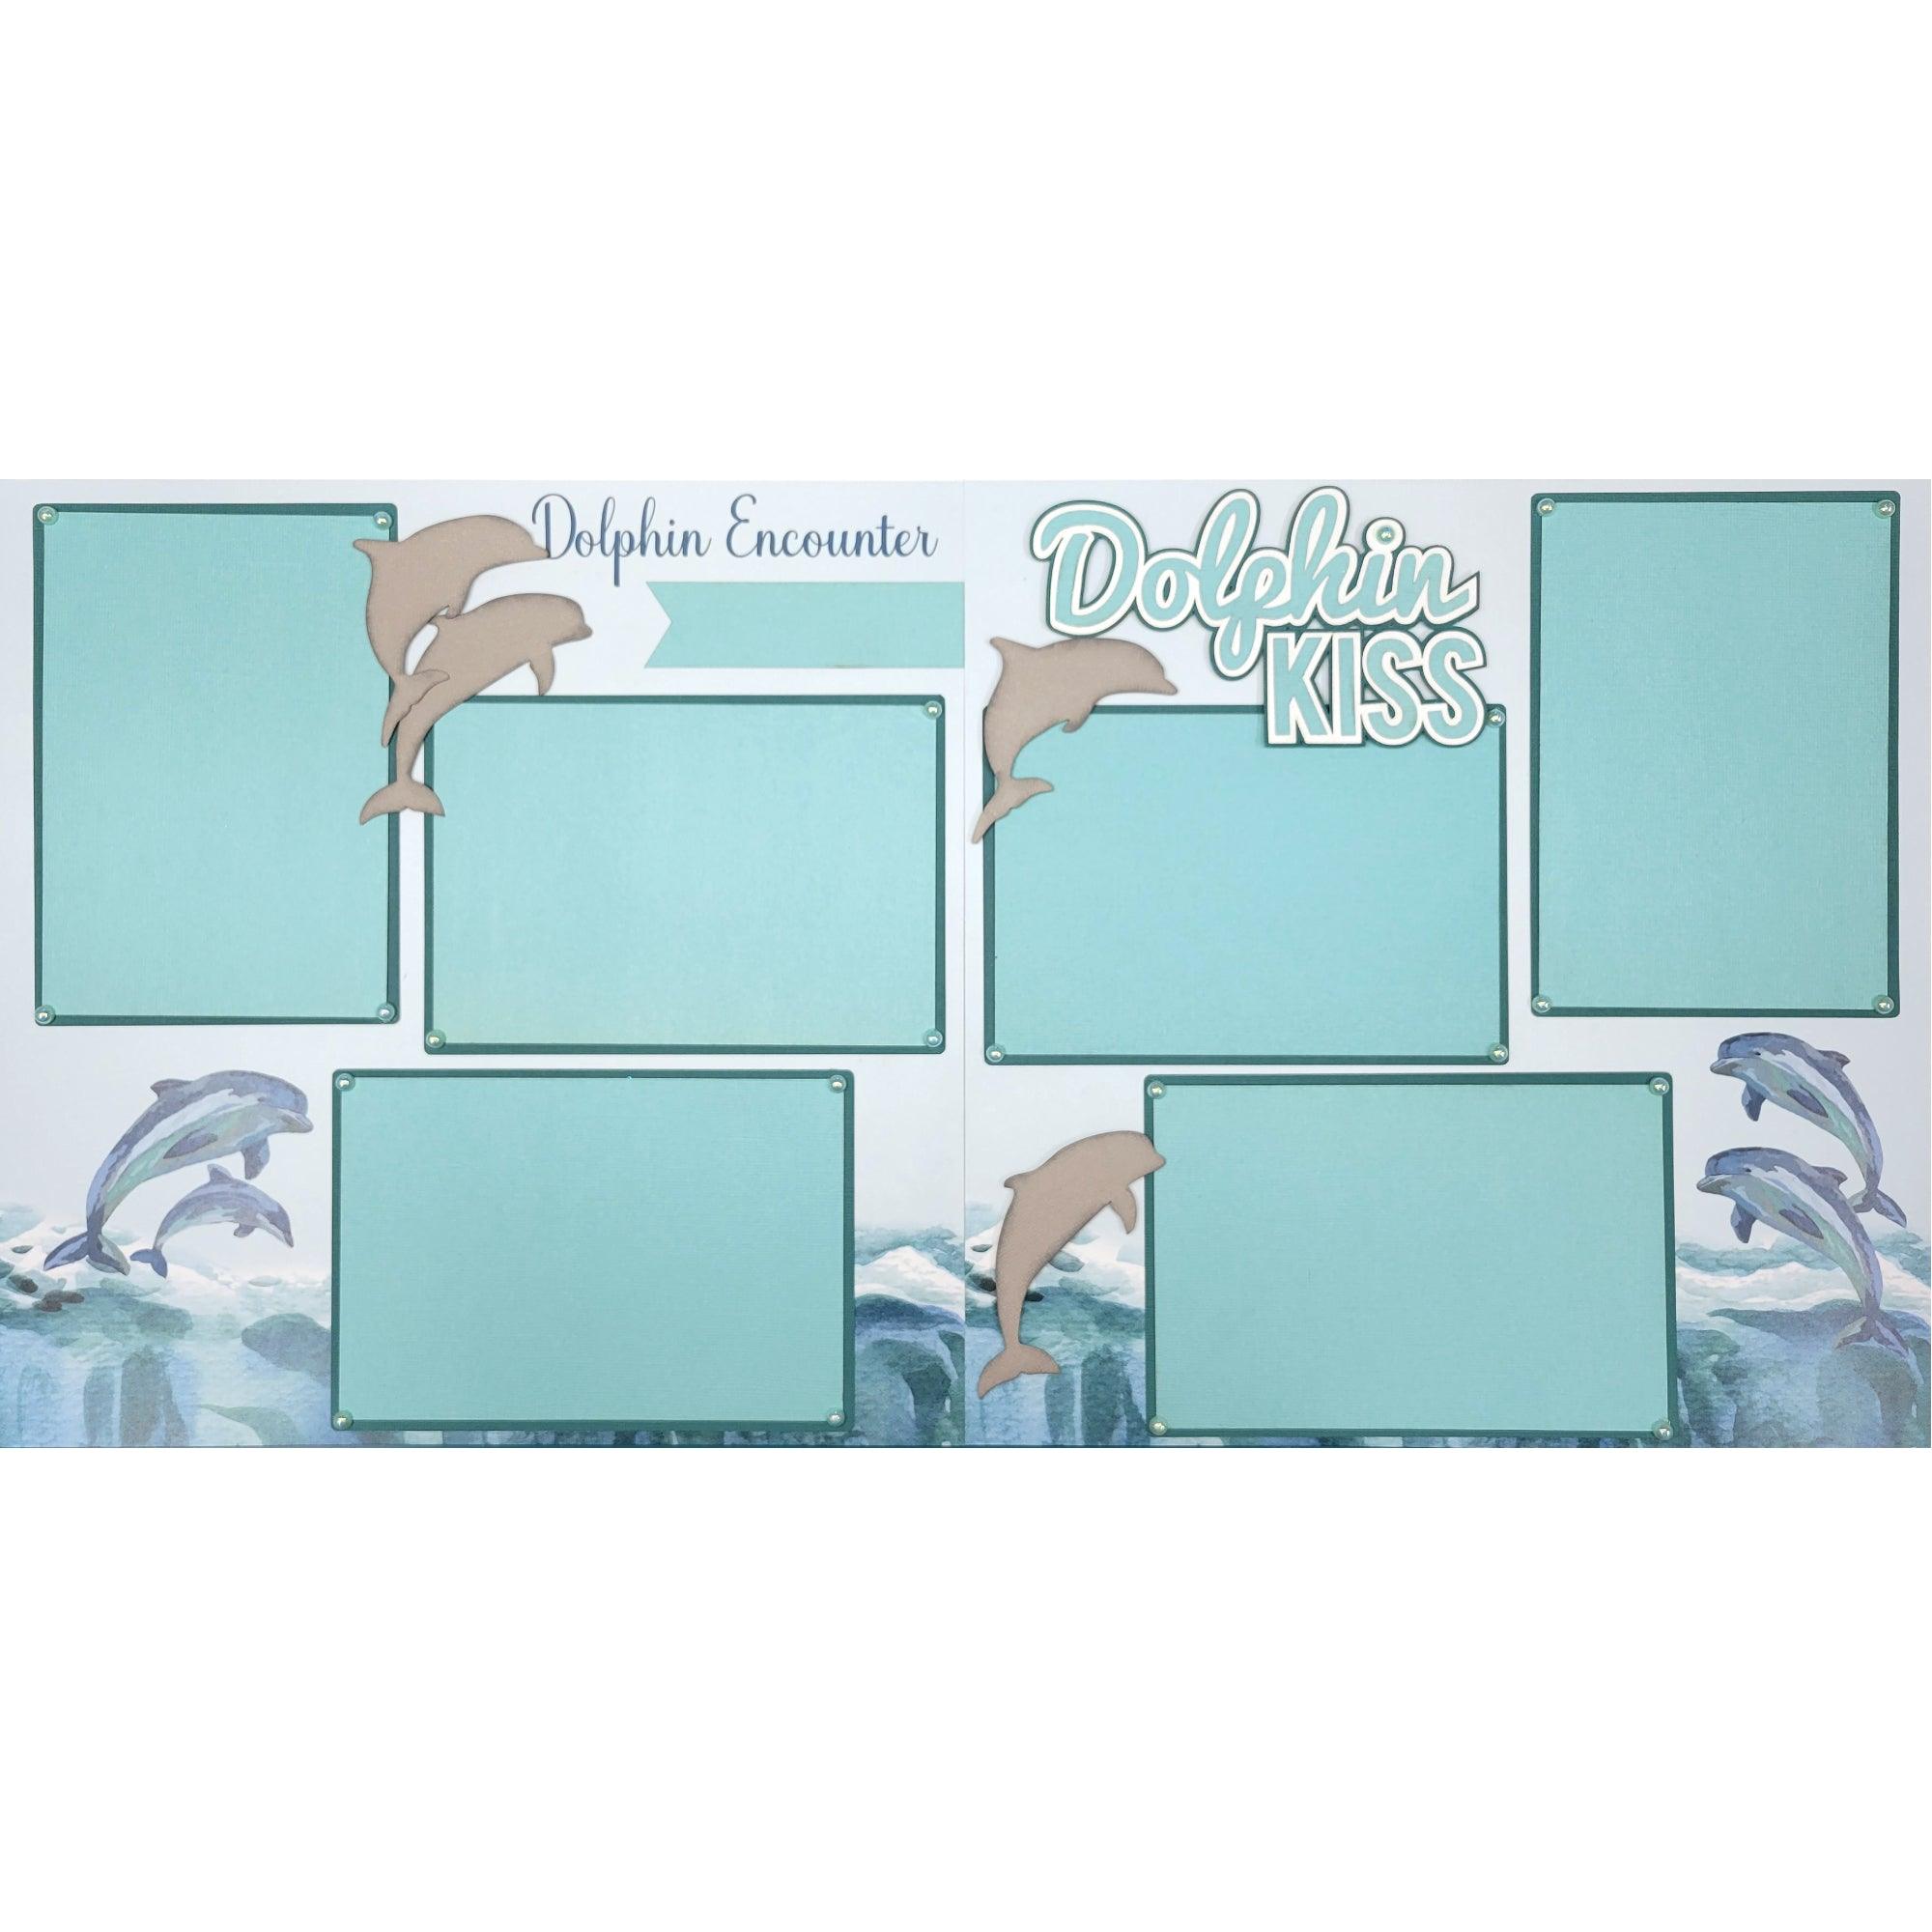 Dolphin Encounter (2) - 12 x 12 Pages, Fully-Assembled & Hand-Crafted 3D Scrapbook Premade by SSC Designs